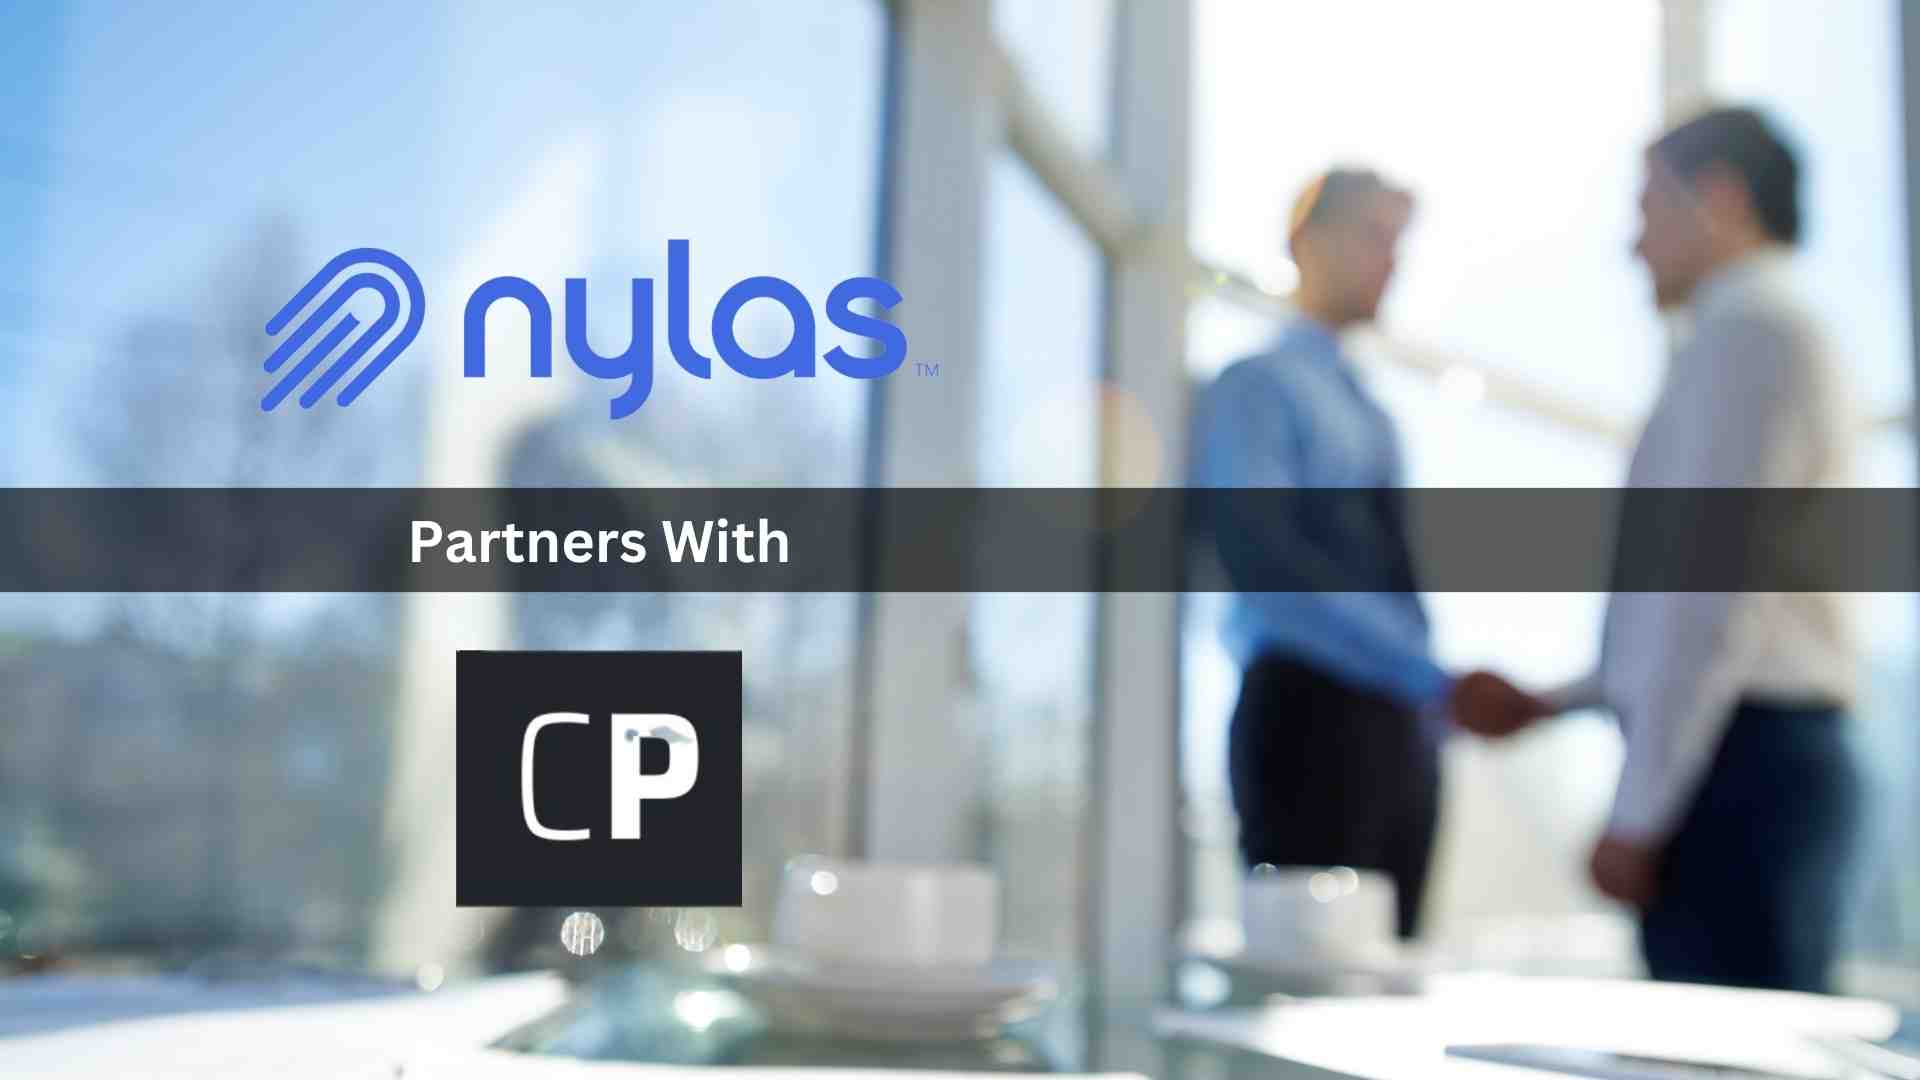 Nylas Partners With Connected Product to Help Companies Launch Email and Scheduling Capabilities Within Their Applications Faster